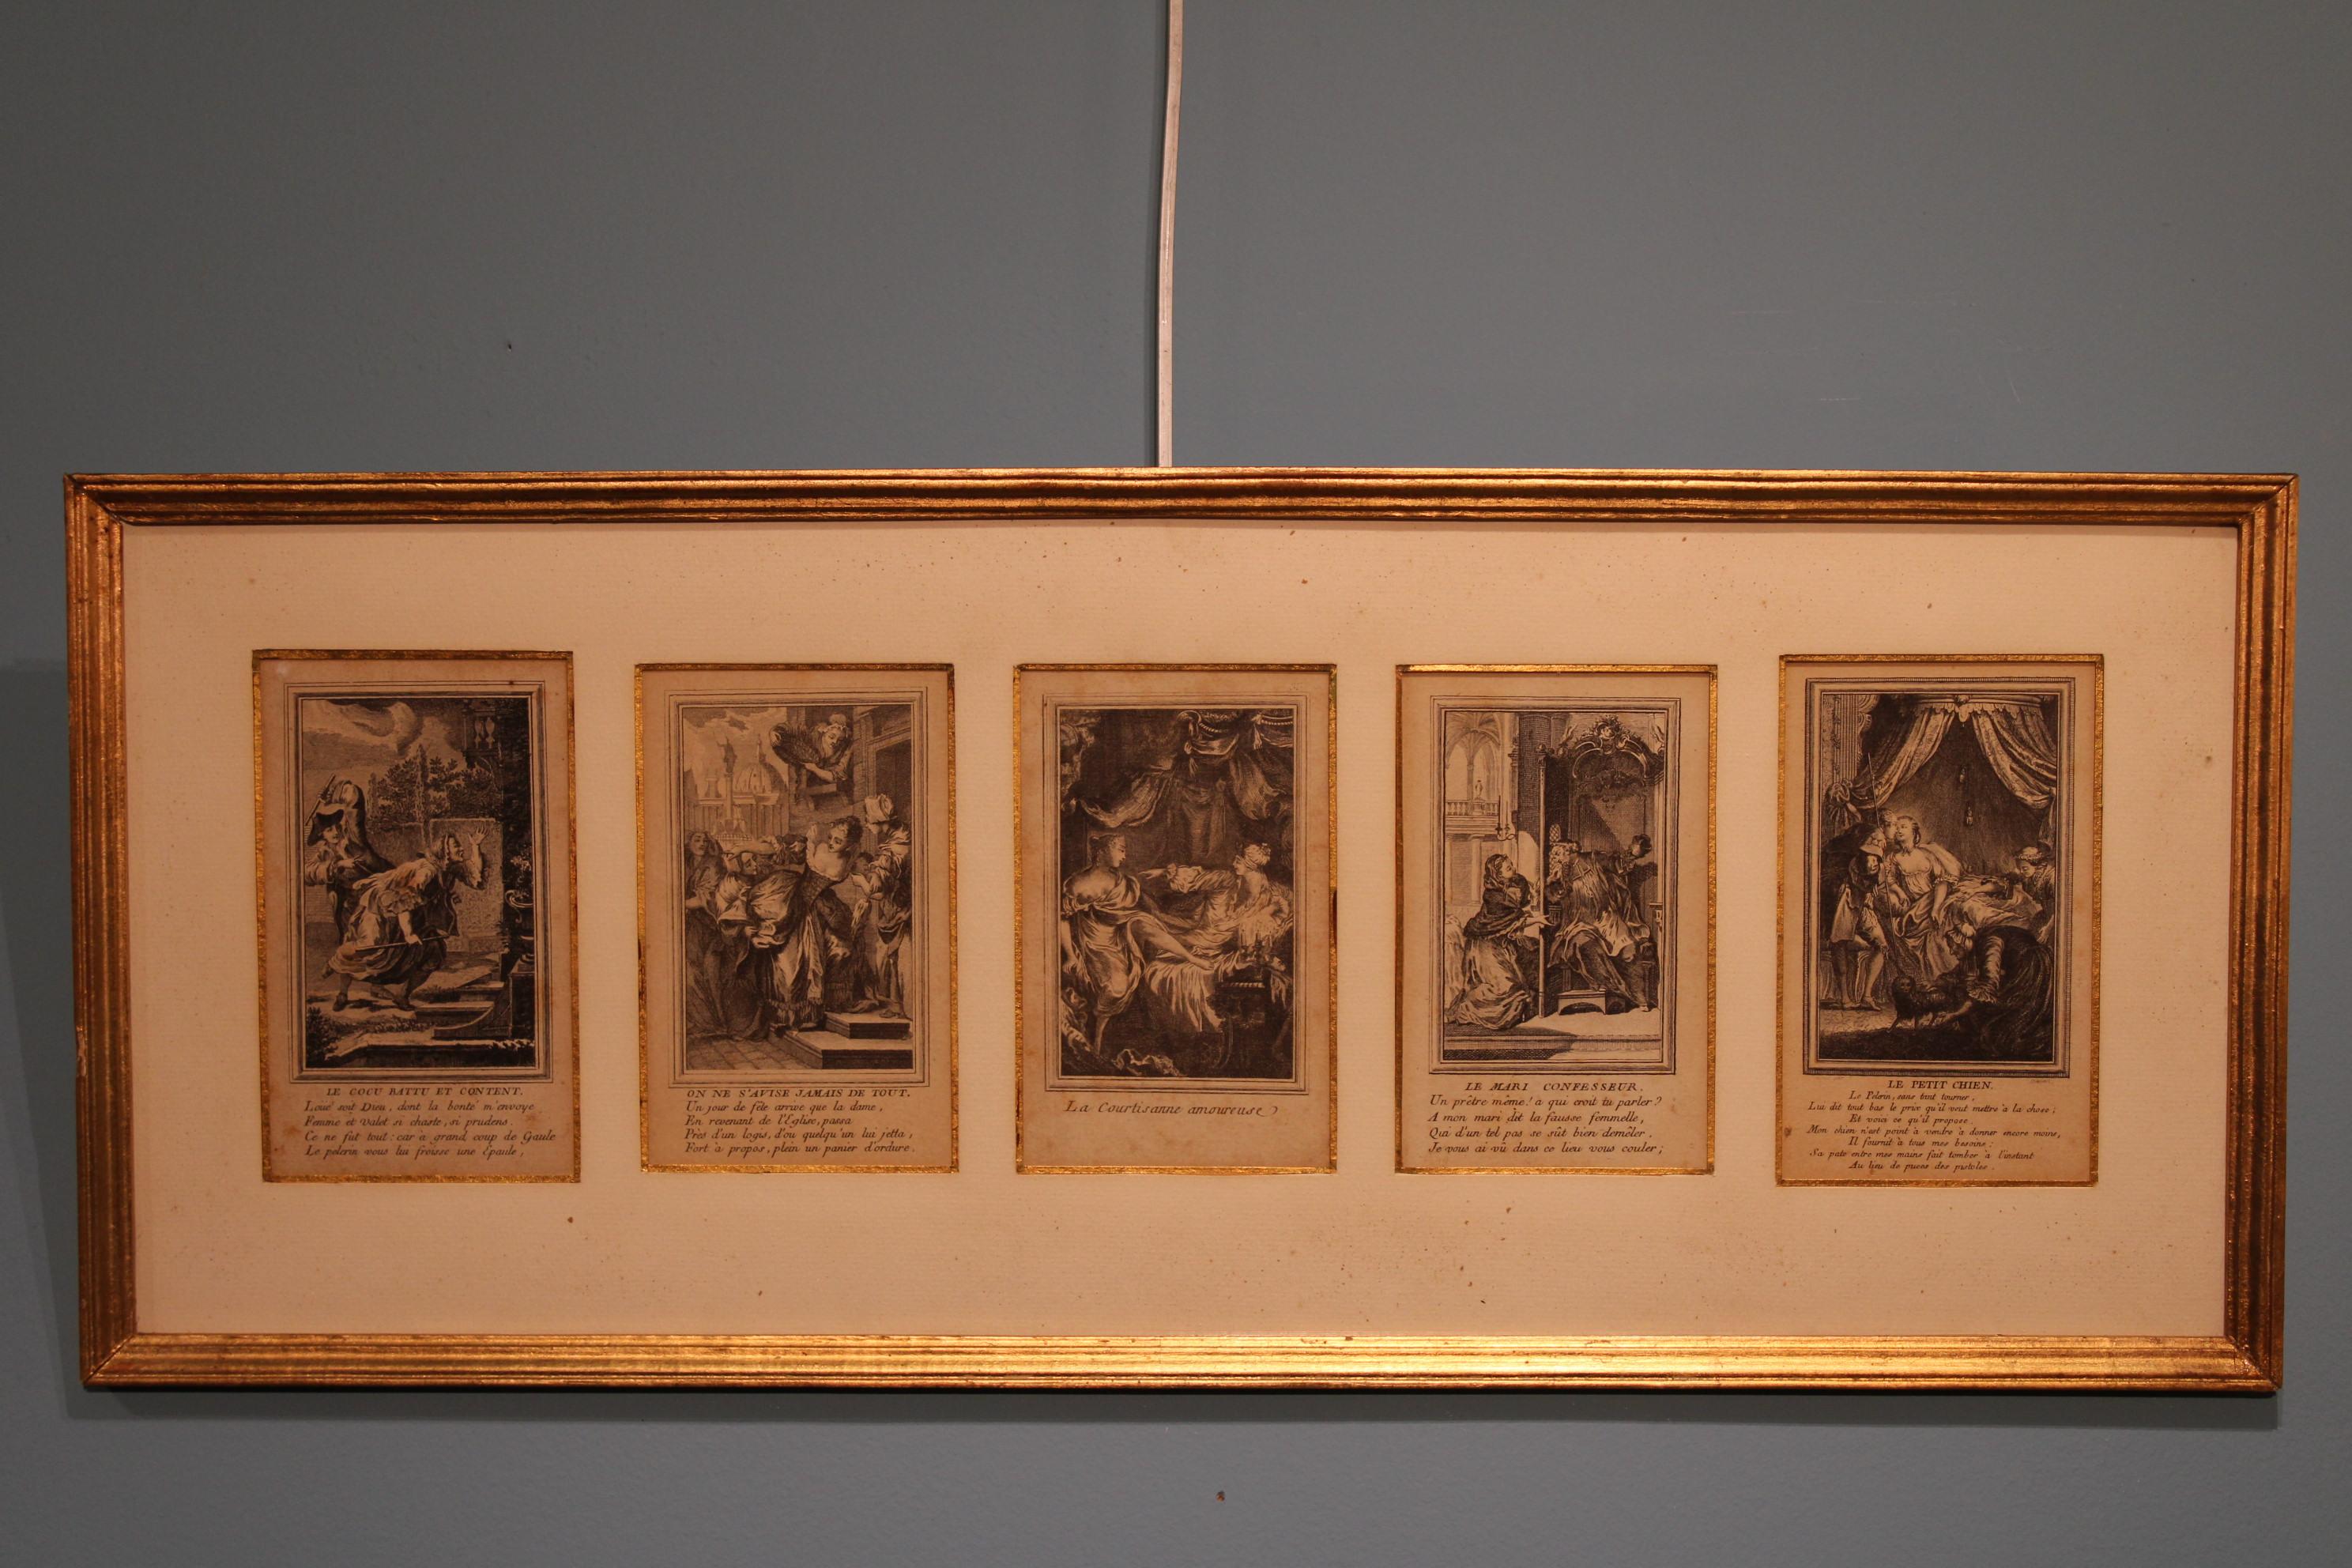 5 engravings framed, 18th century period.

Dimensions with frame : 59 x 24 x 1 cm
Images dimensions : 8 x 14 cm.